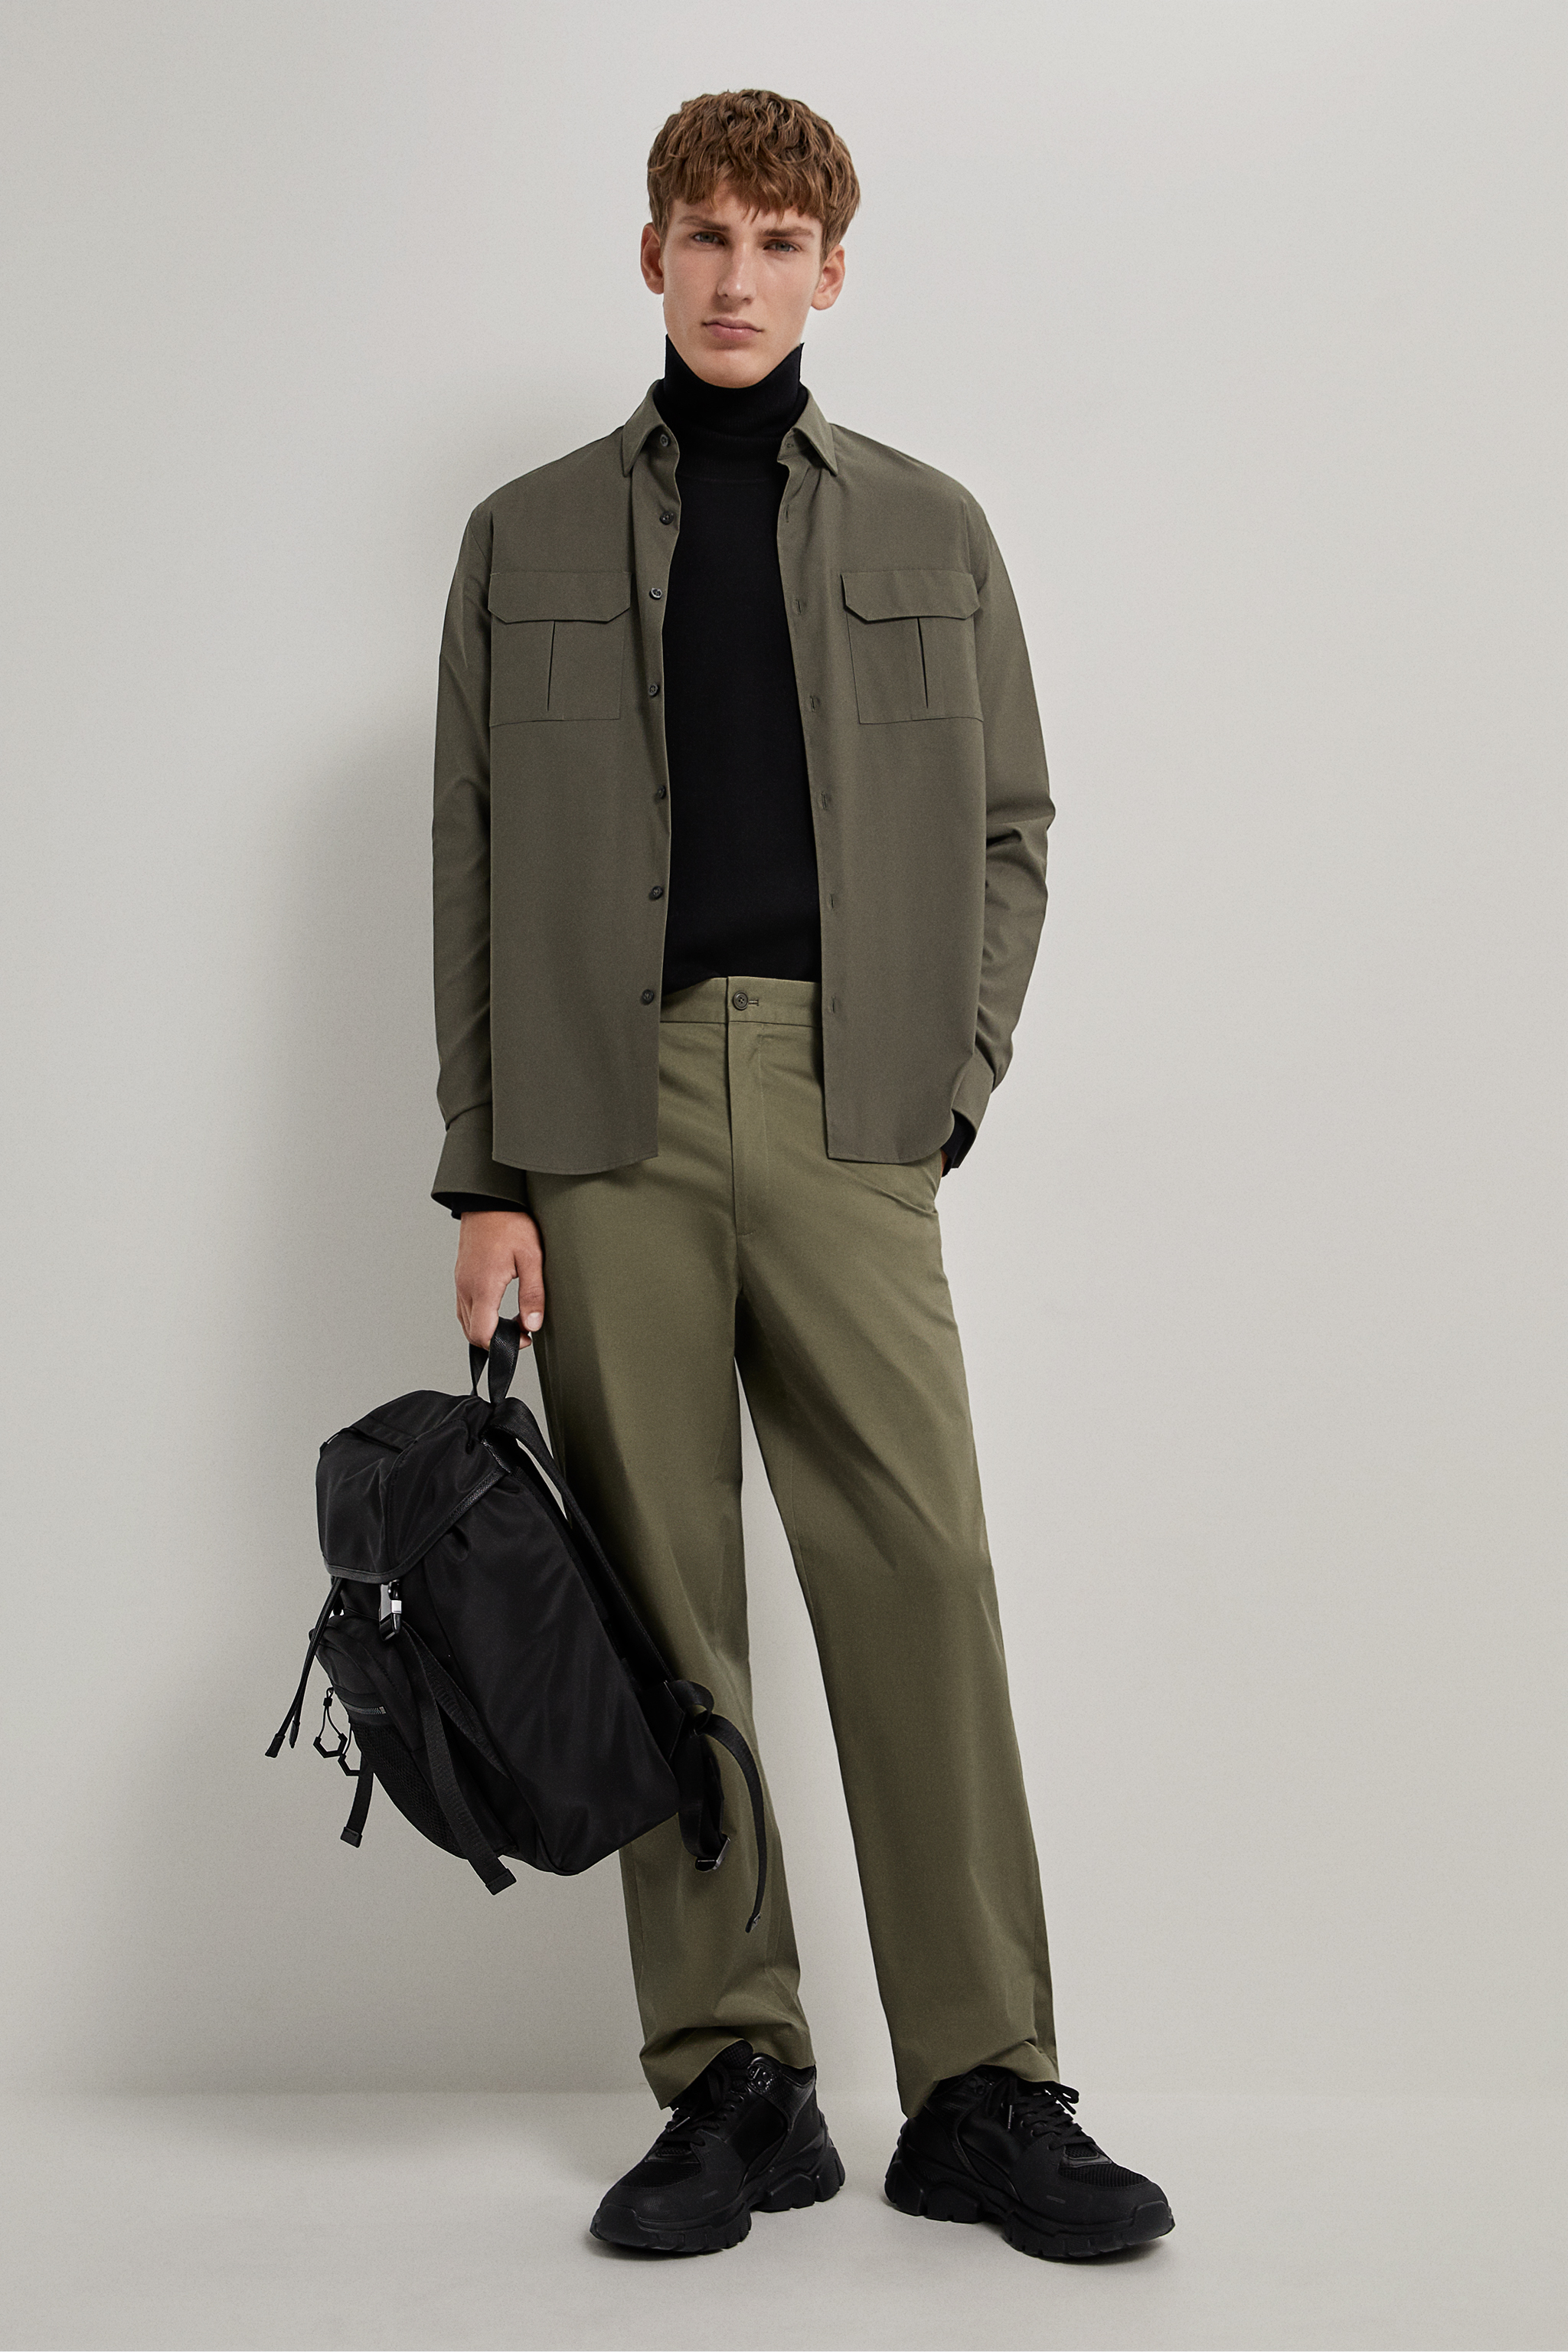 The Traveller Collection from Zara Autumn 2020 - VanityForbes